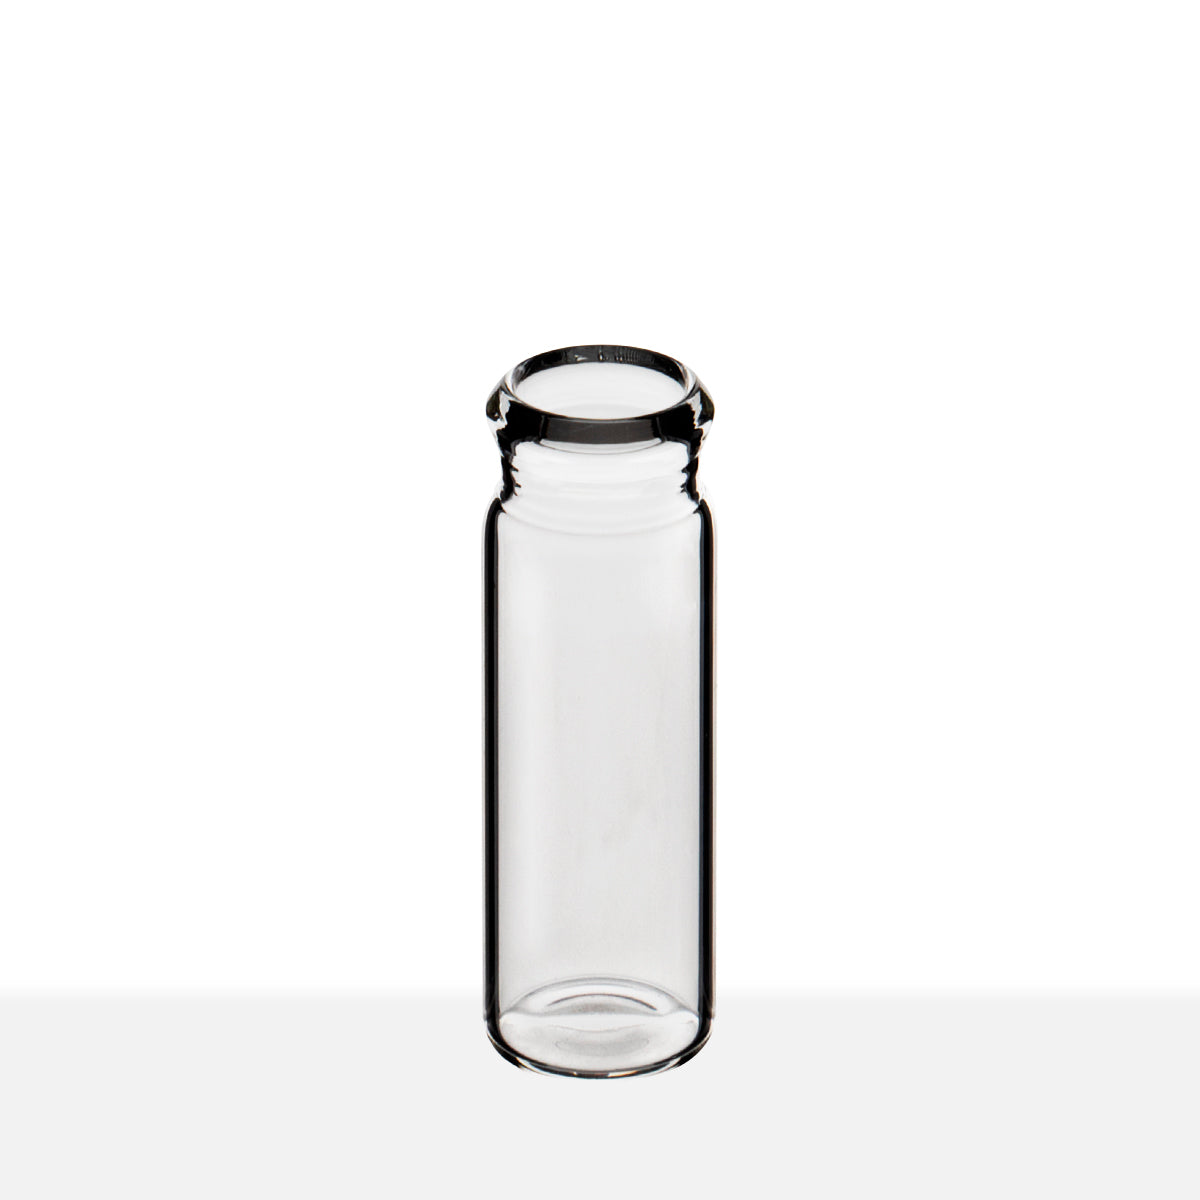 DISPLAY GLASS VIALS - CLEAR Item #:VCPS1545